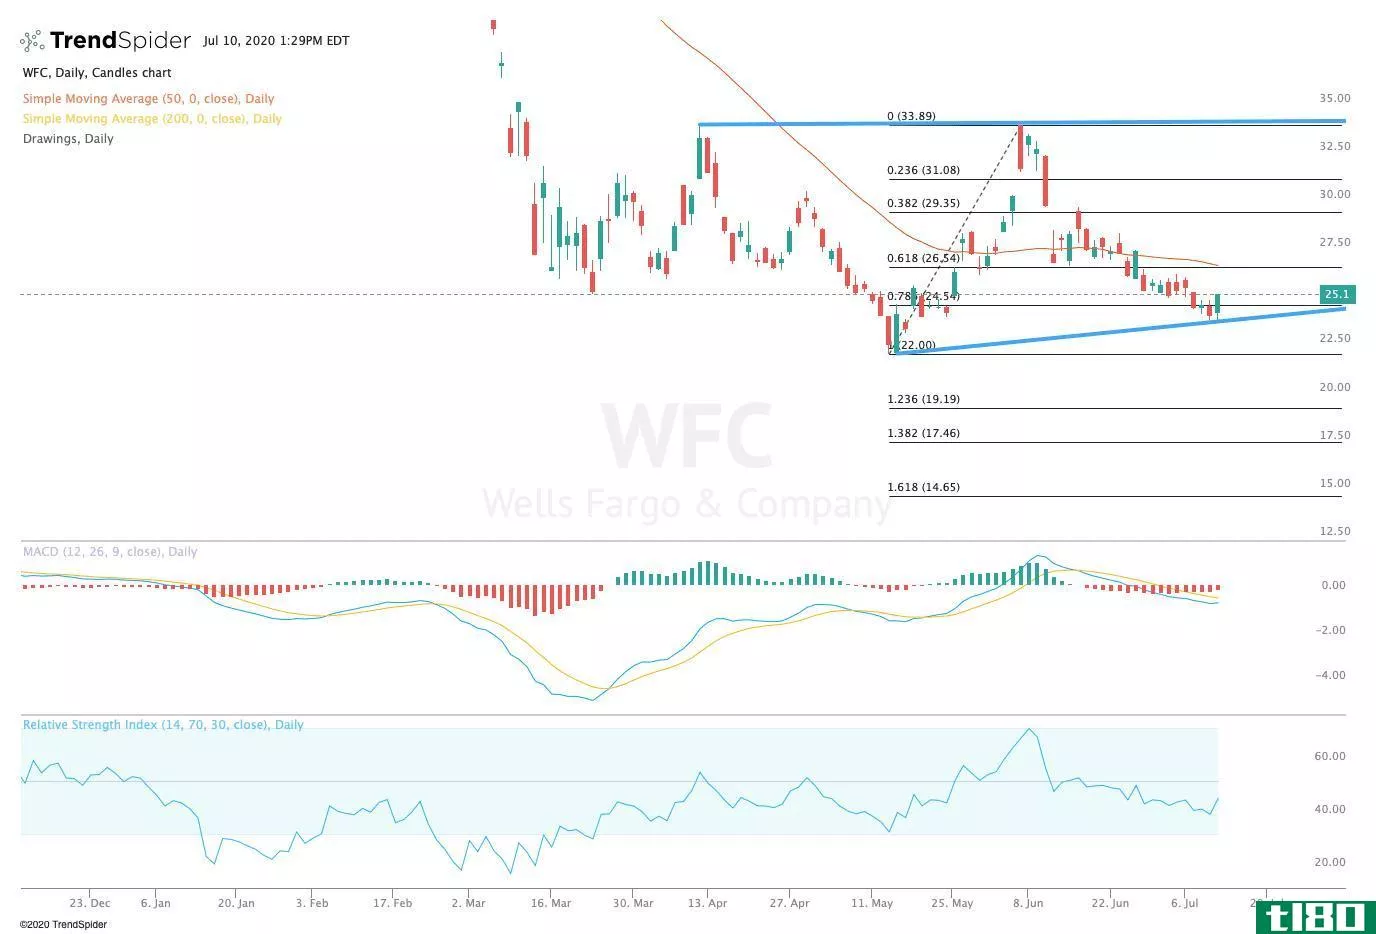 Chart showing the share price performance of Wells Fargo & Company (WFC)